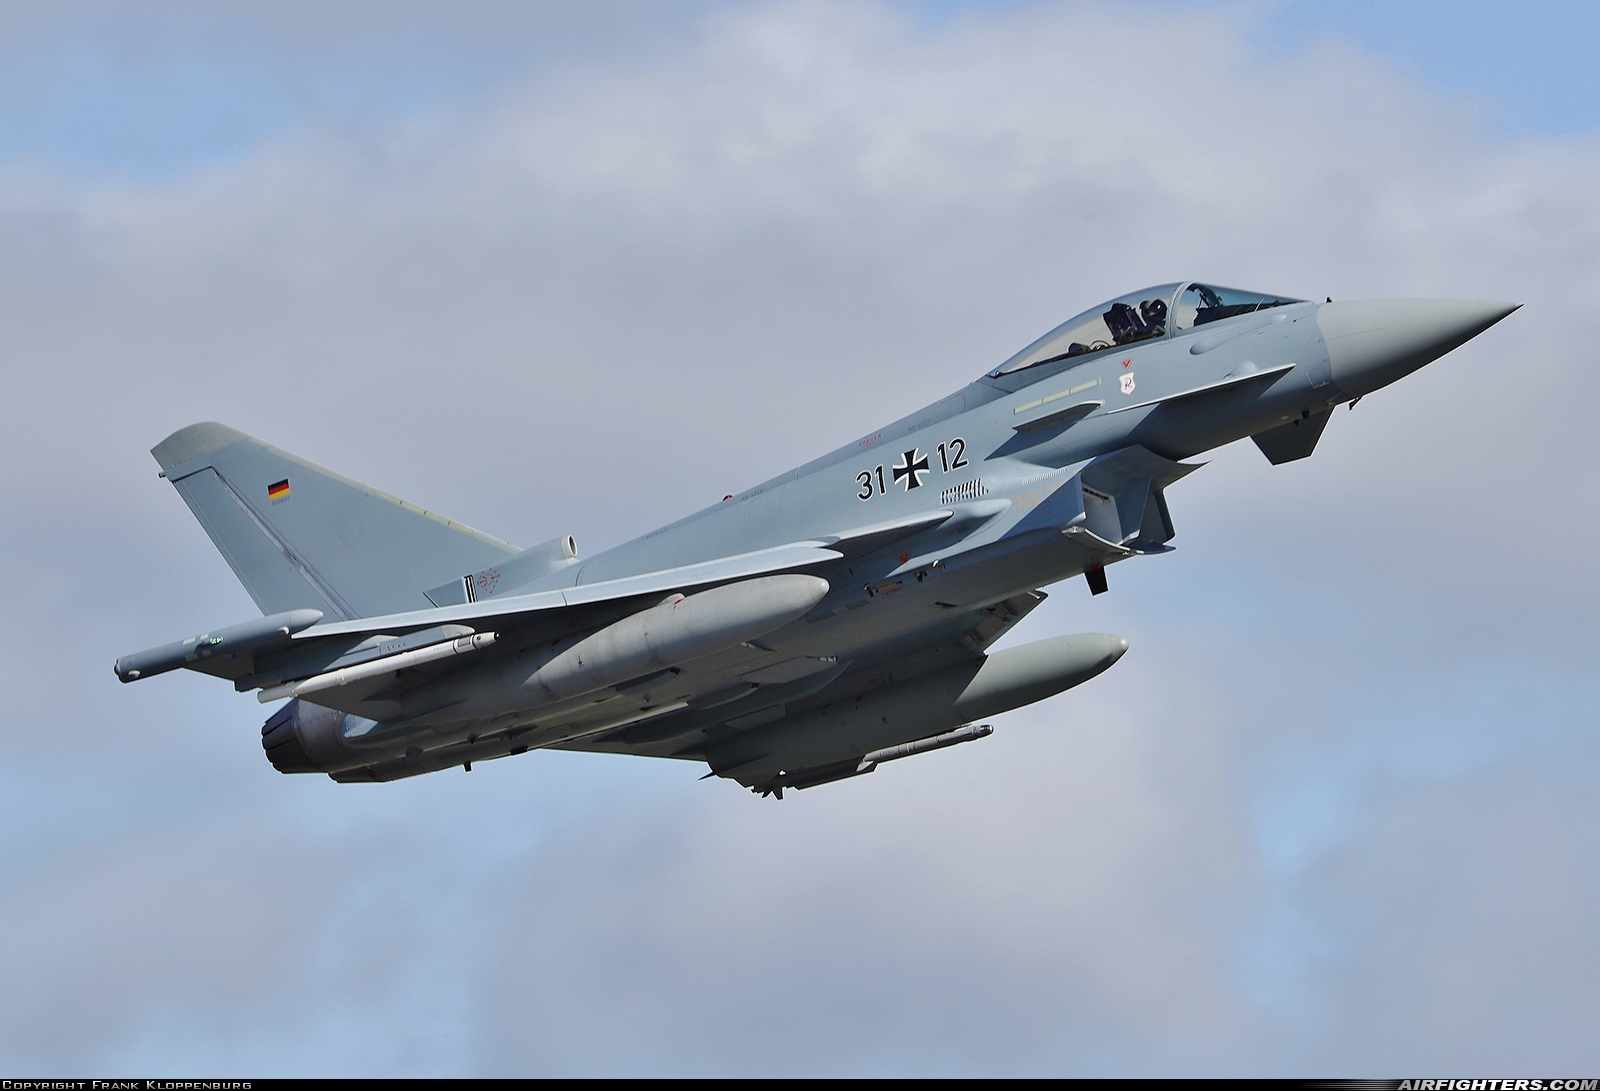 Germany - Air Force Eurofighter EF-2000 Typhoon S 31+12 at Wittmundhafen (Wittmund) (ETNT), Germany